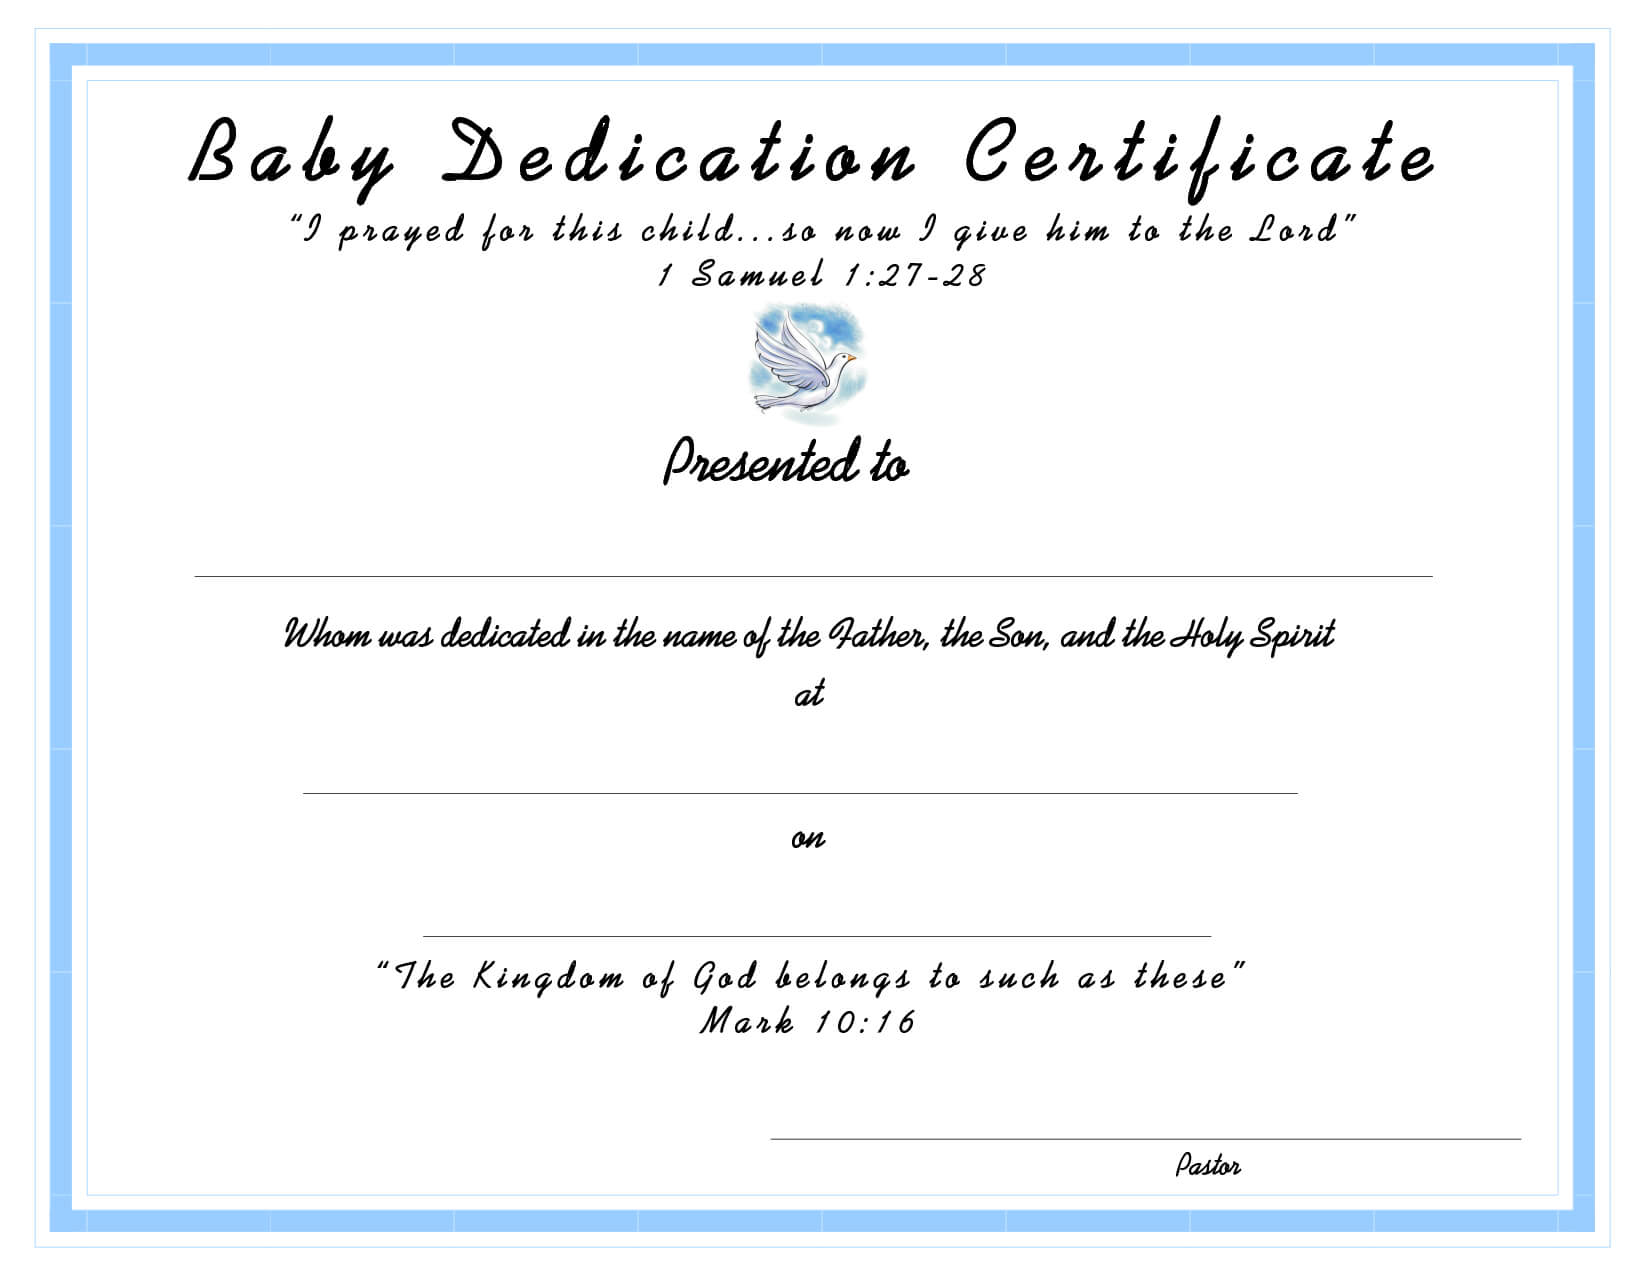 Baby Dedication Document Sample1650 X 1275 84 Kb Png X For Baby Christening Certificate Template